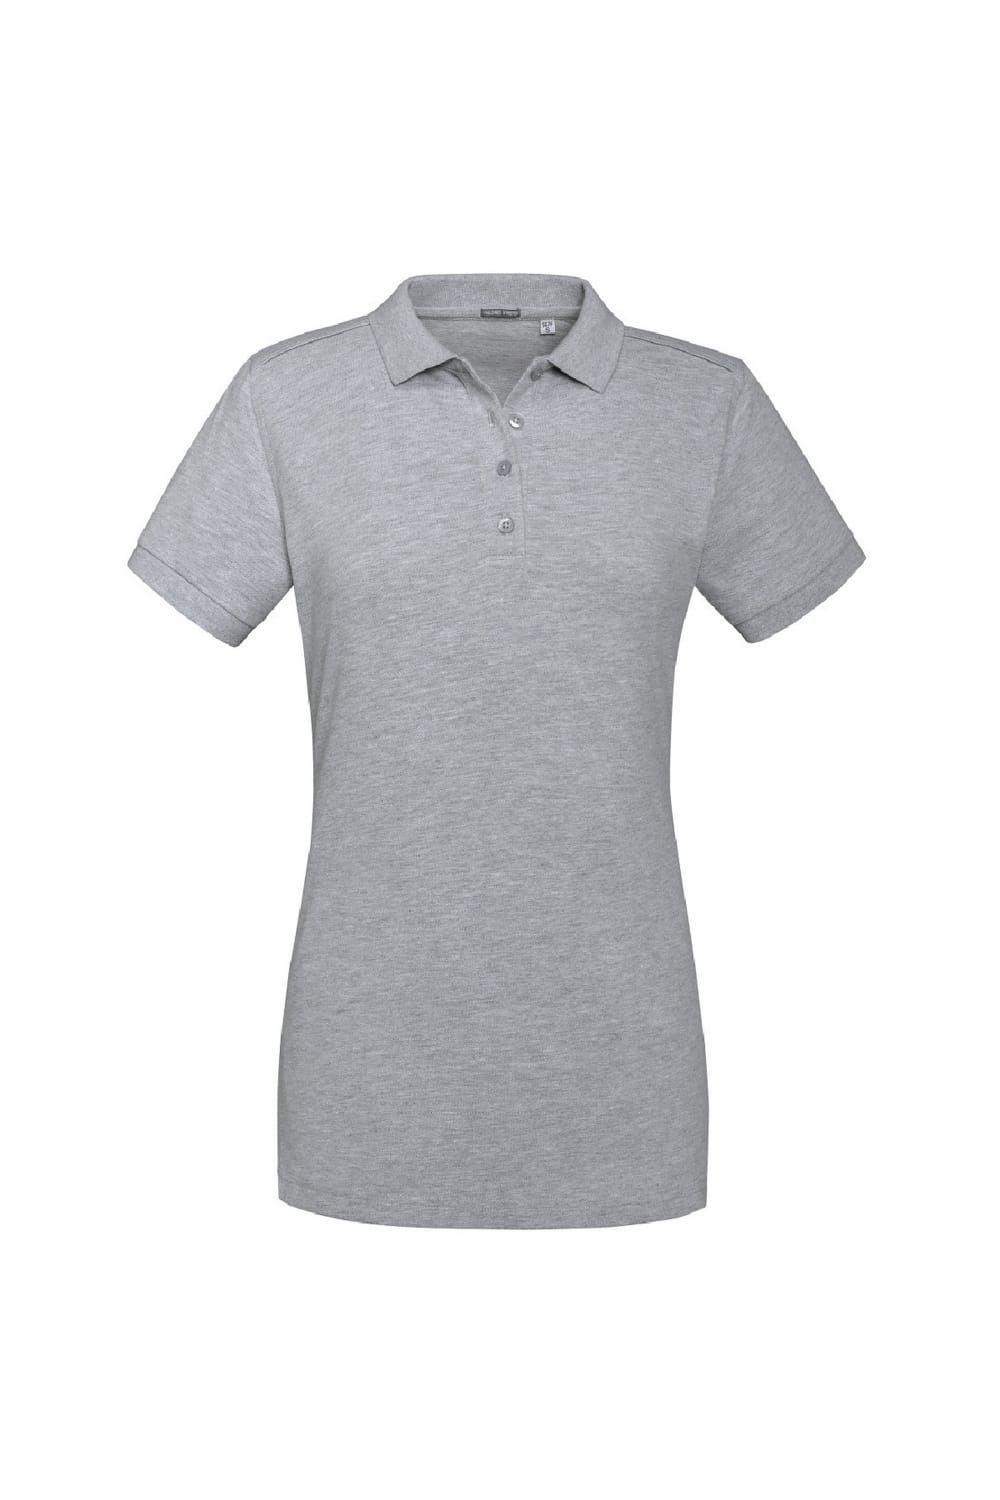 Russell Womens/Ladies Tailored Stretch Polo (Light Oxford)